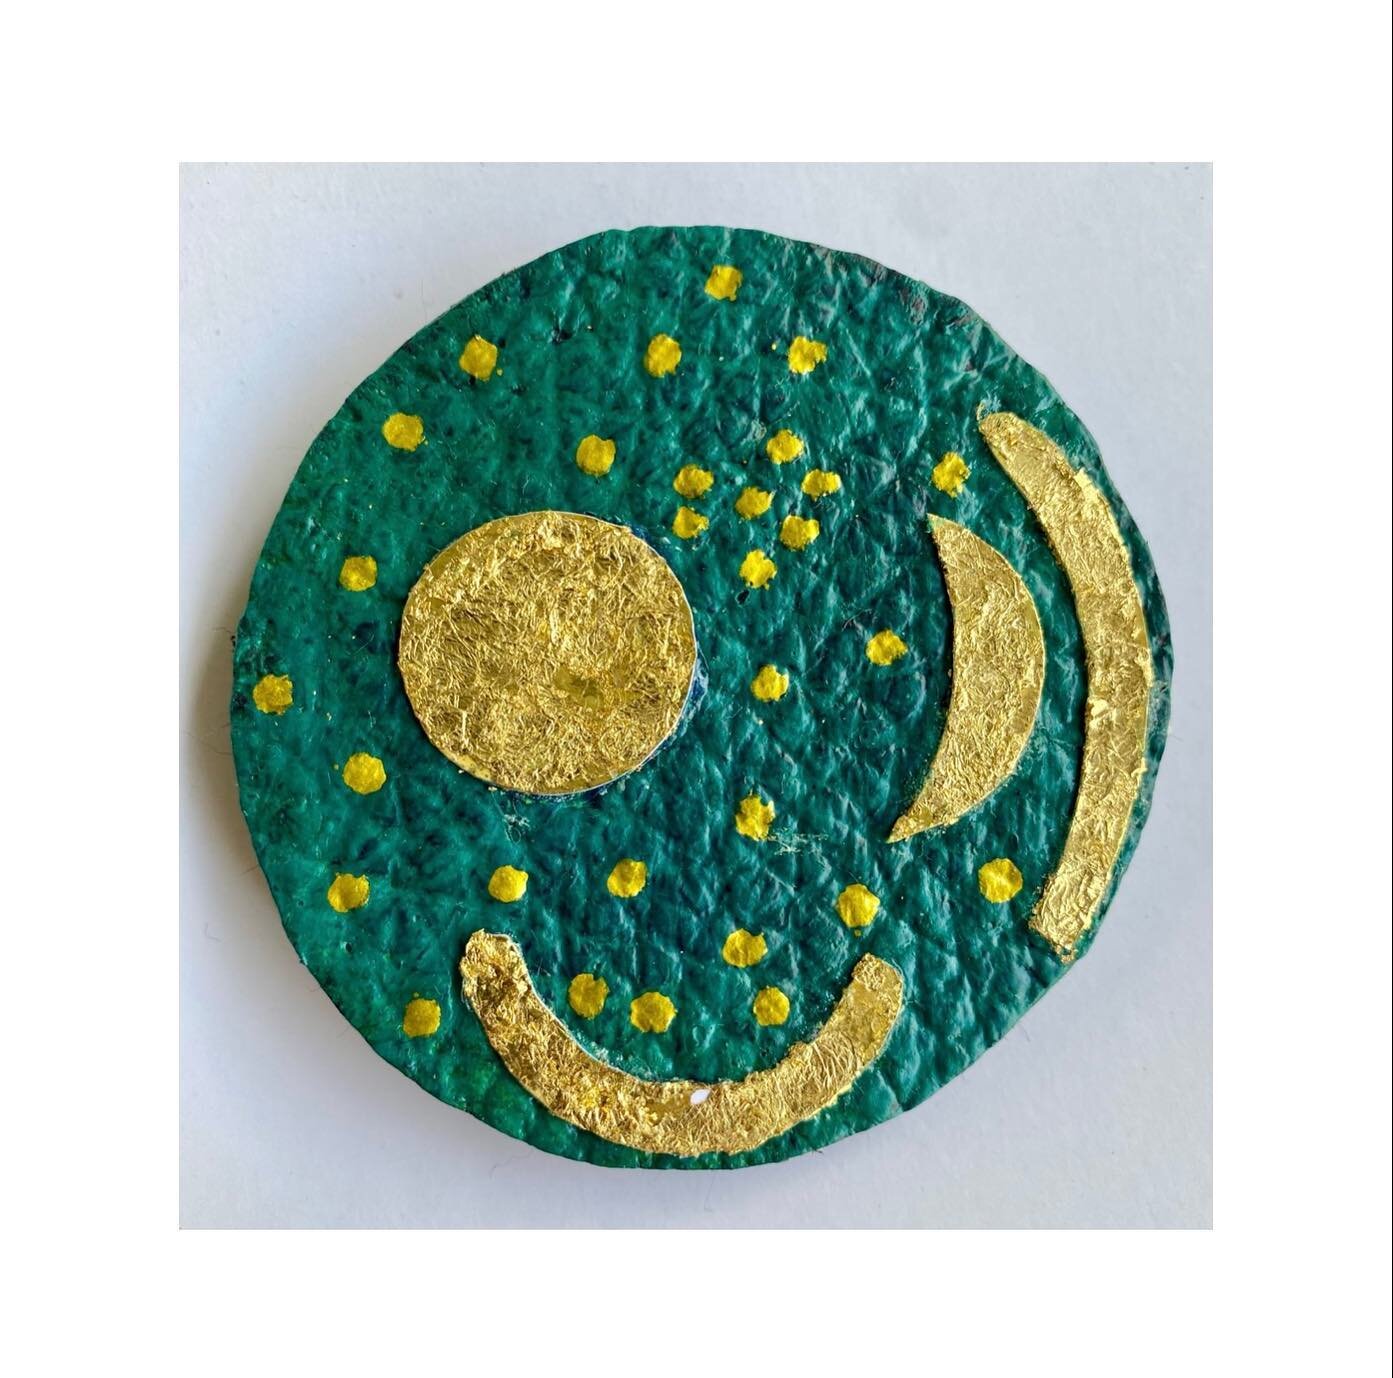 I&rsquo;m thrilled to be running a &lsquo;Make your own Nebra Sky Disc brooch&rsquo; workshop tonight at the @britishmuseum Solstice Late&hellip;here&rsquo;s one I made earlier! Come along on a first-come, first-serve basis to celebrate the summer so